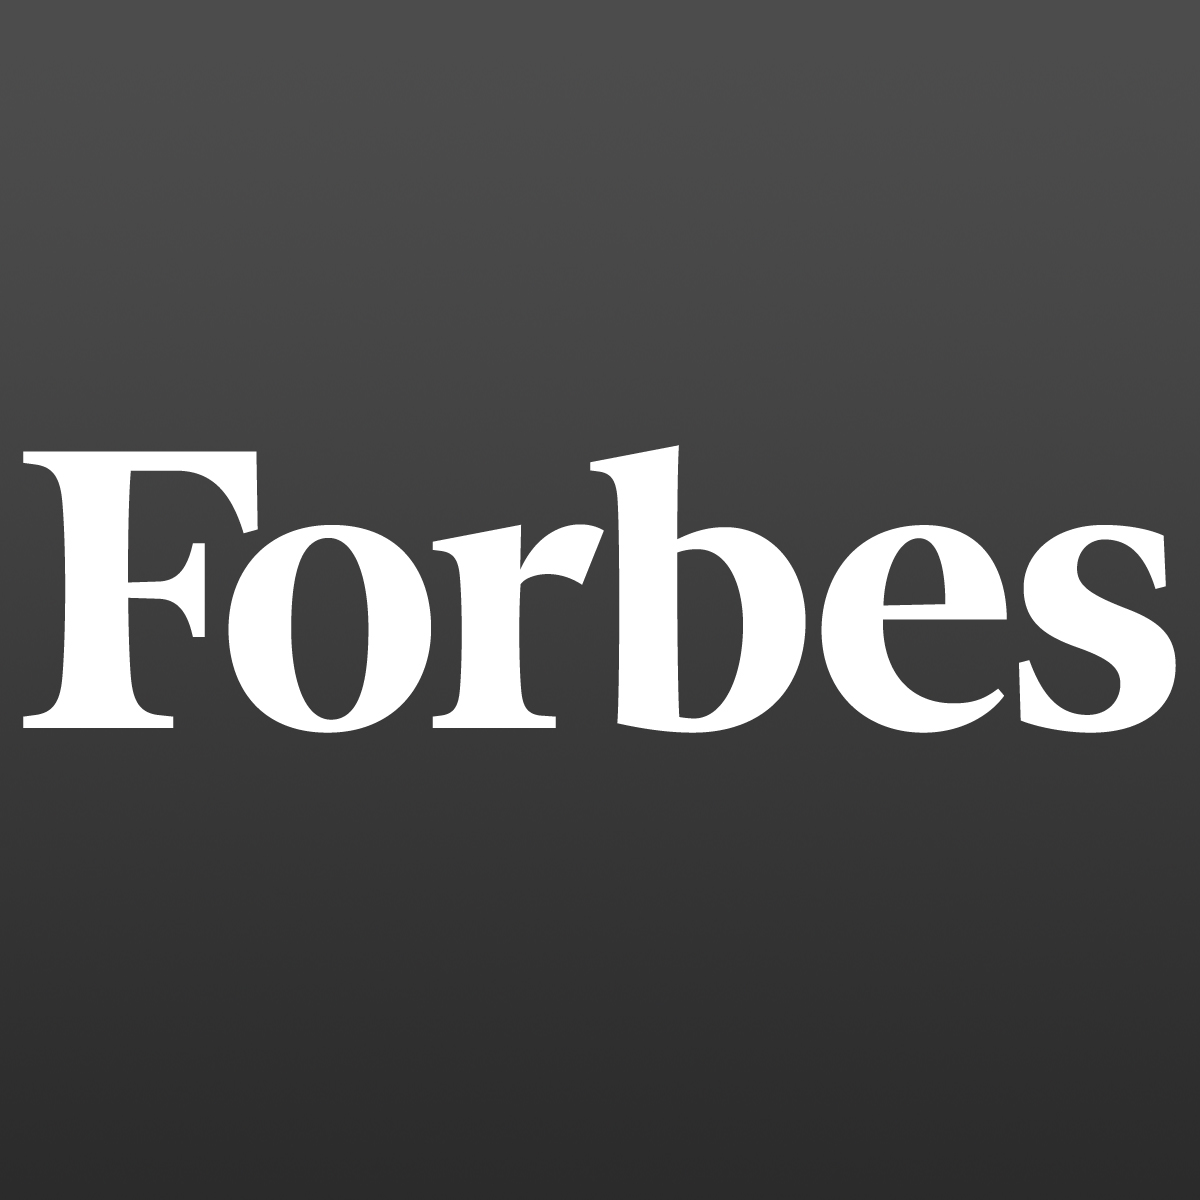 Black and white Forbes logo